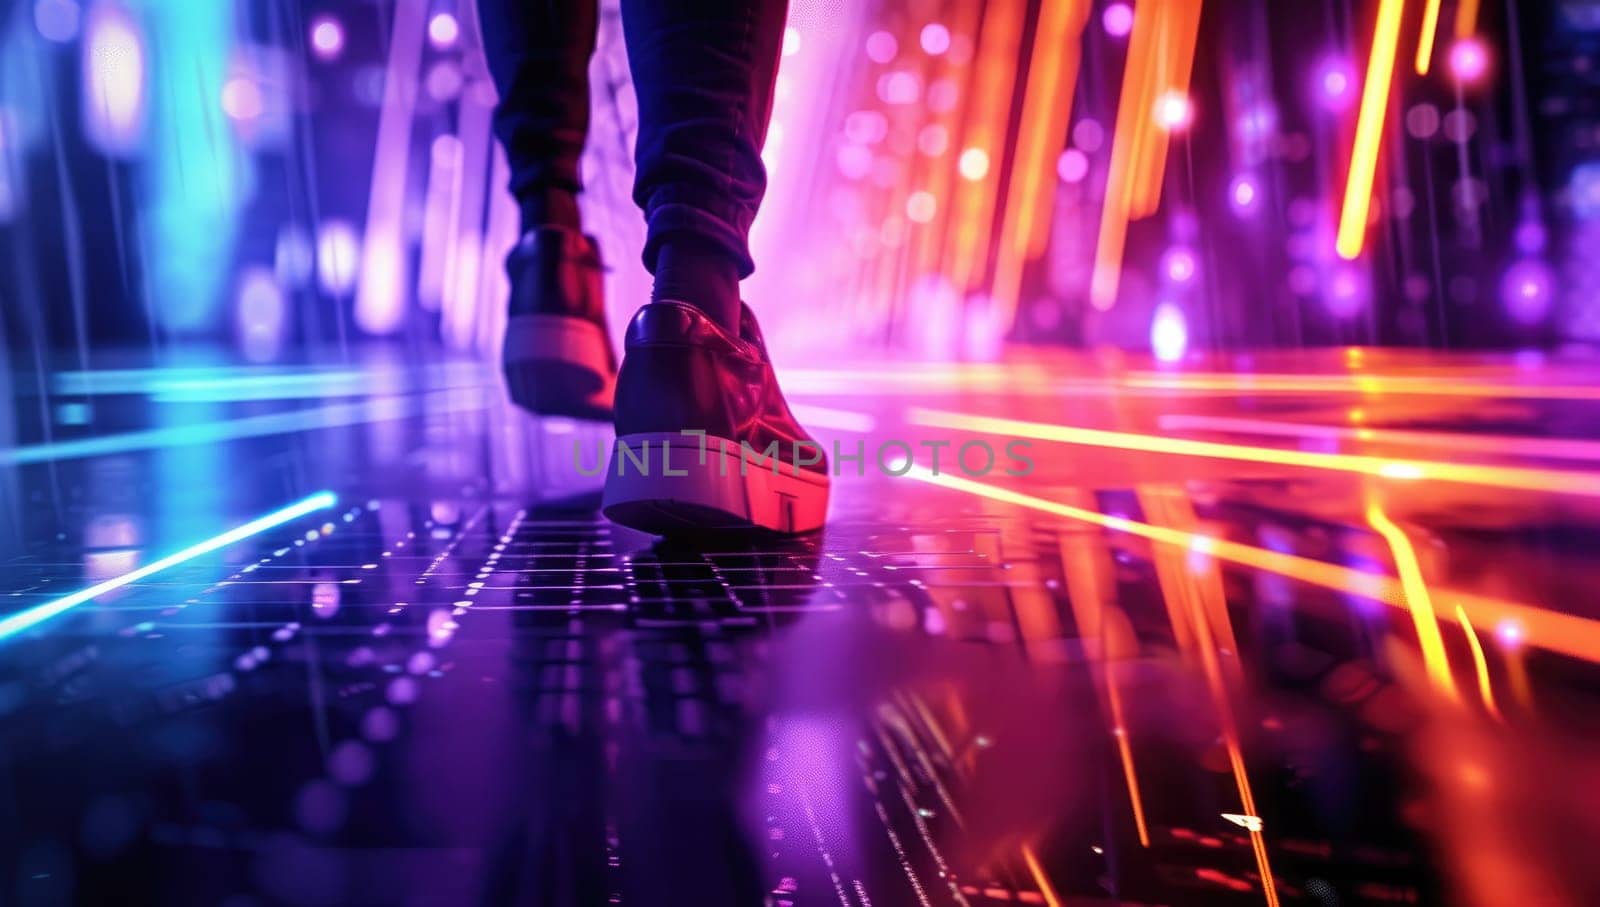 Futuristic Neon Grid with Female Sneakers by ailike